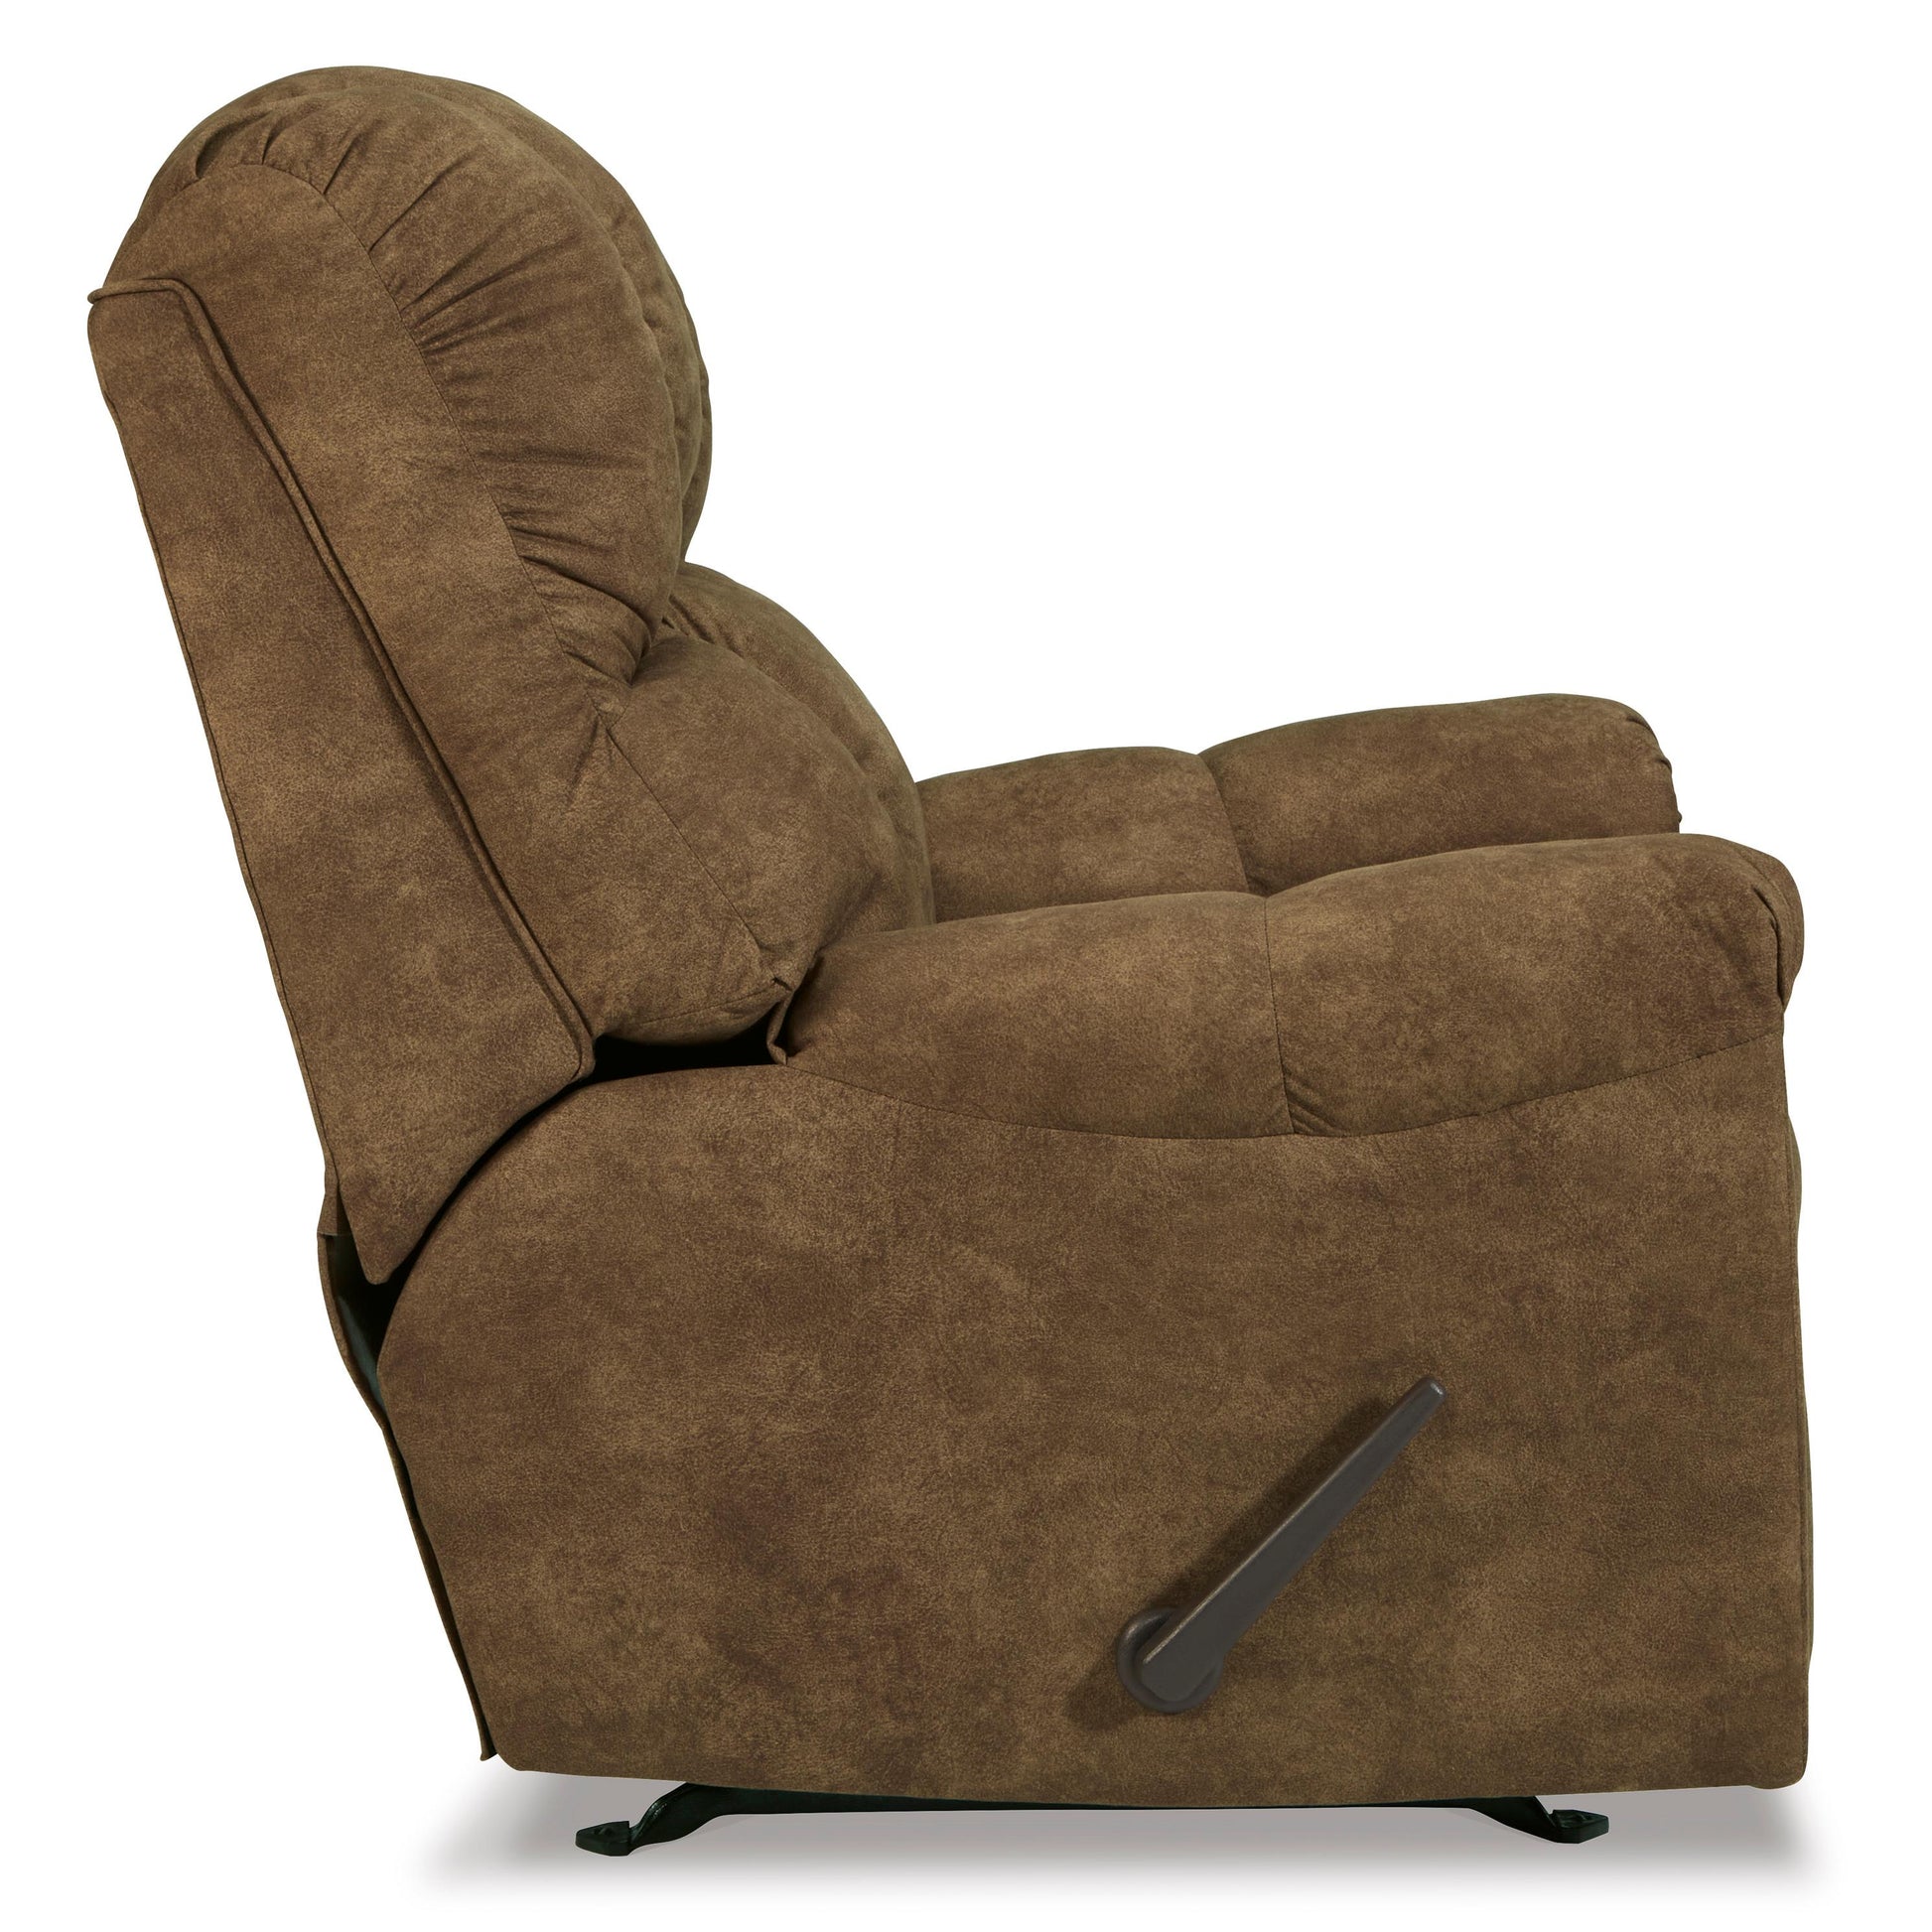 Signature Design by Ashley Potrol Rocker Leather Look Recliner 4430225 IMAGE 3